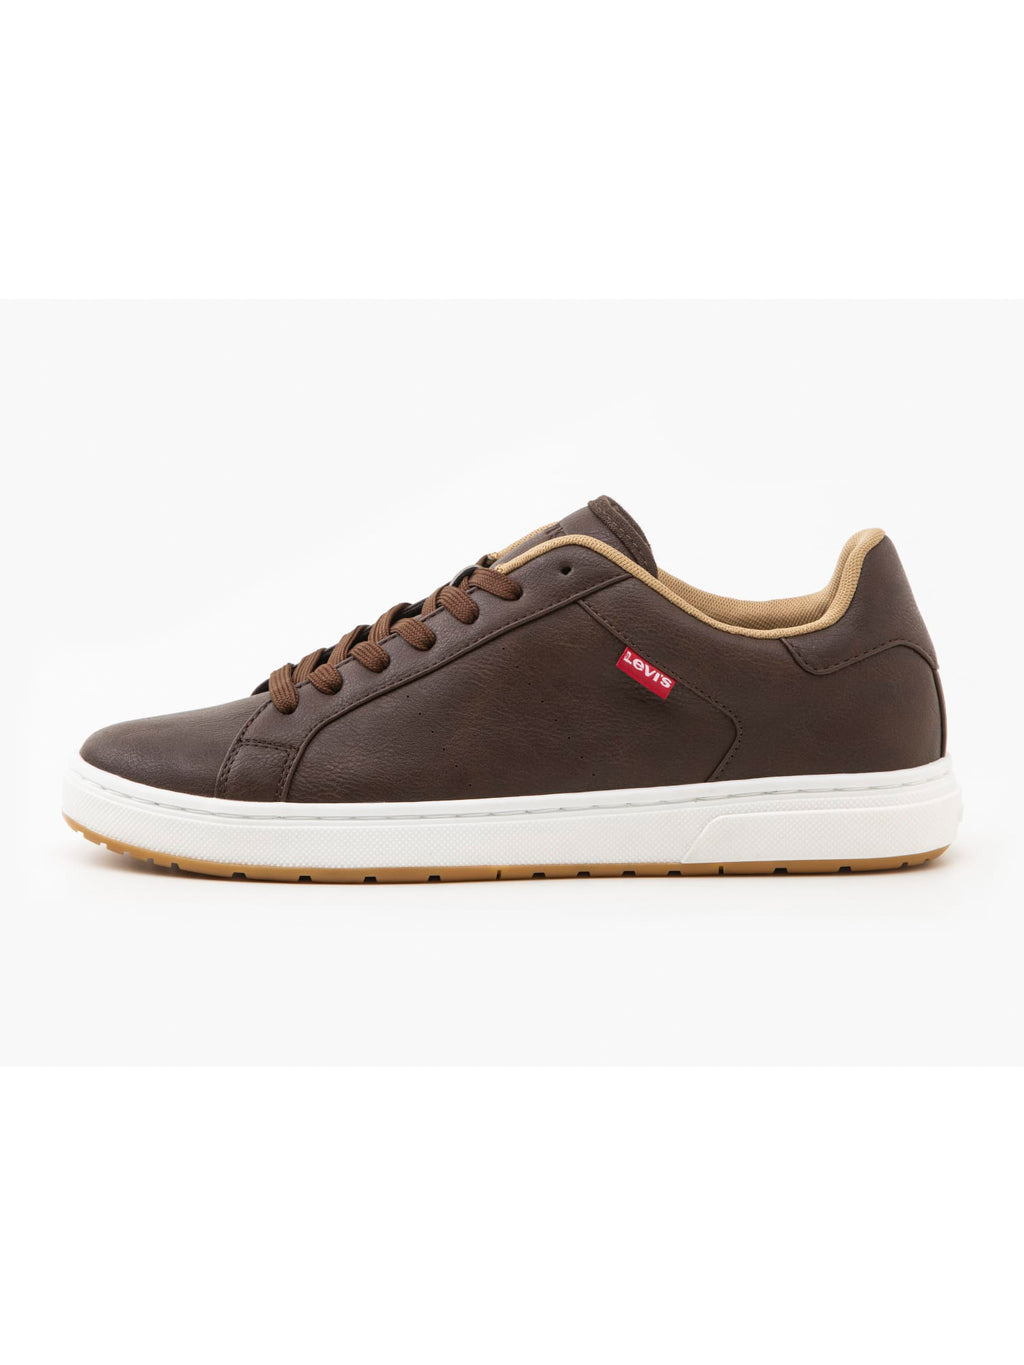 levis-piper-trainers-brown-234234-29